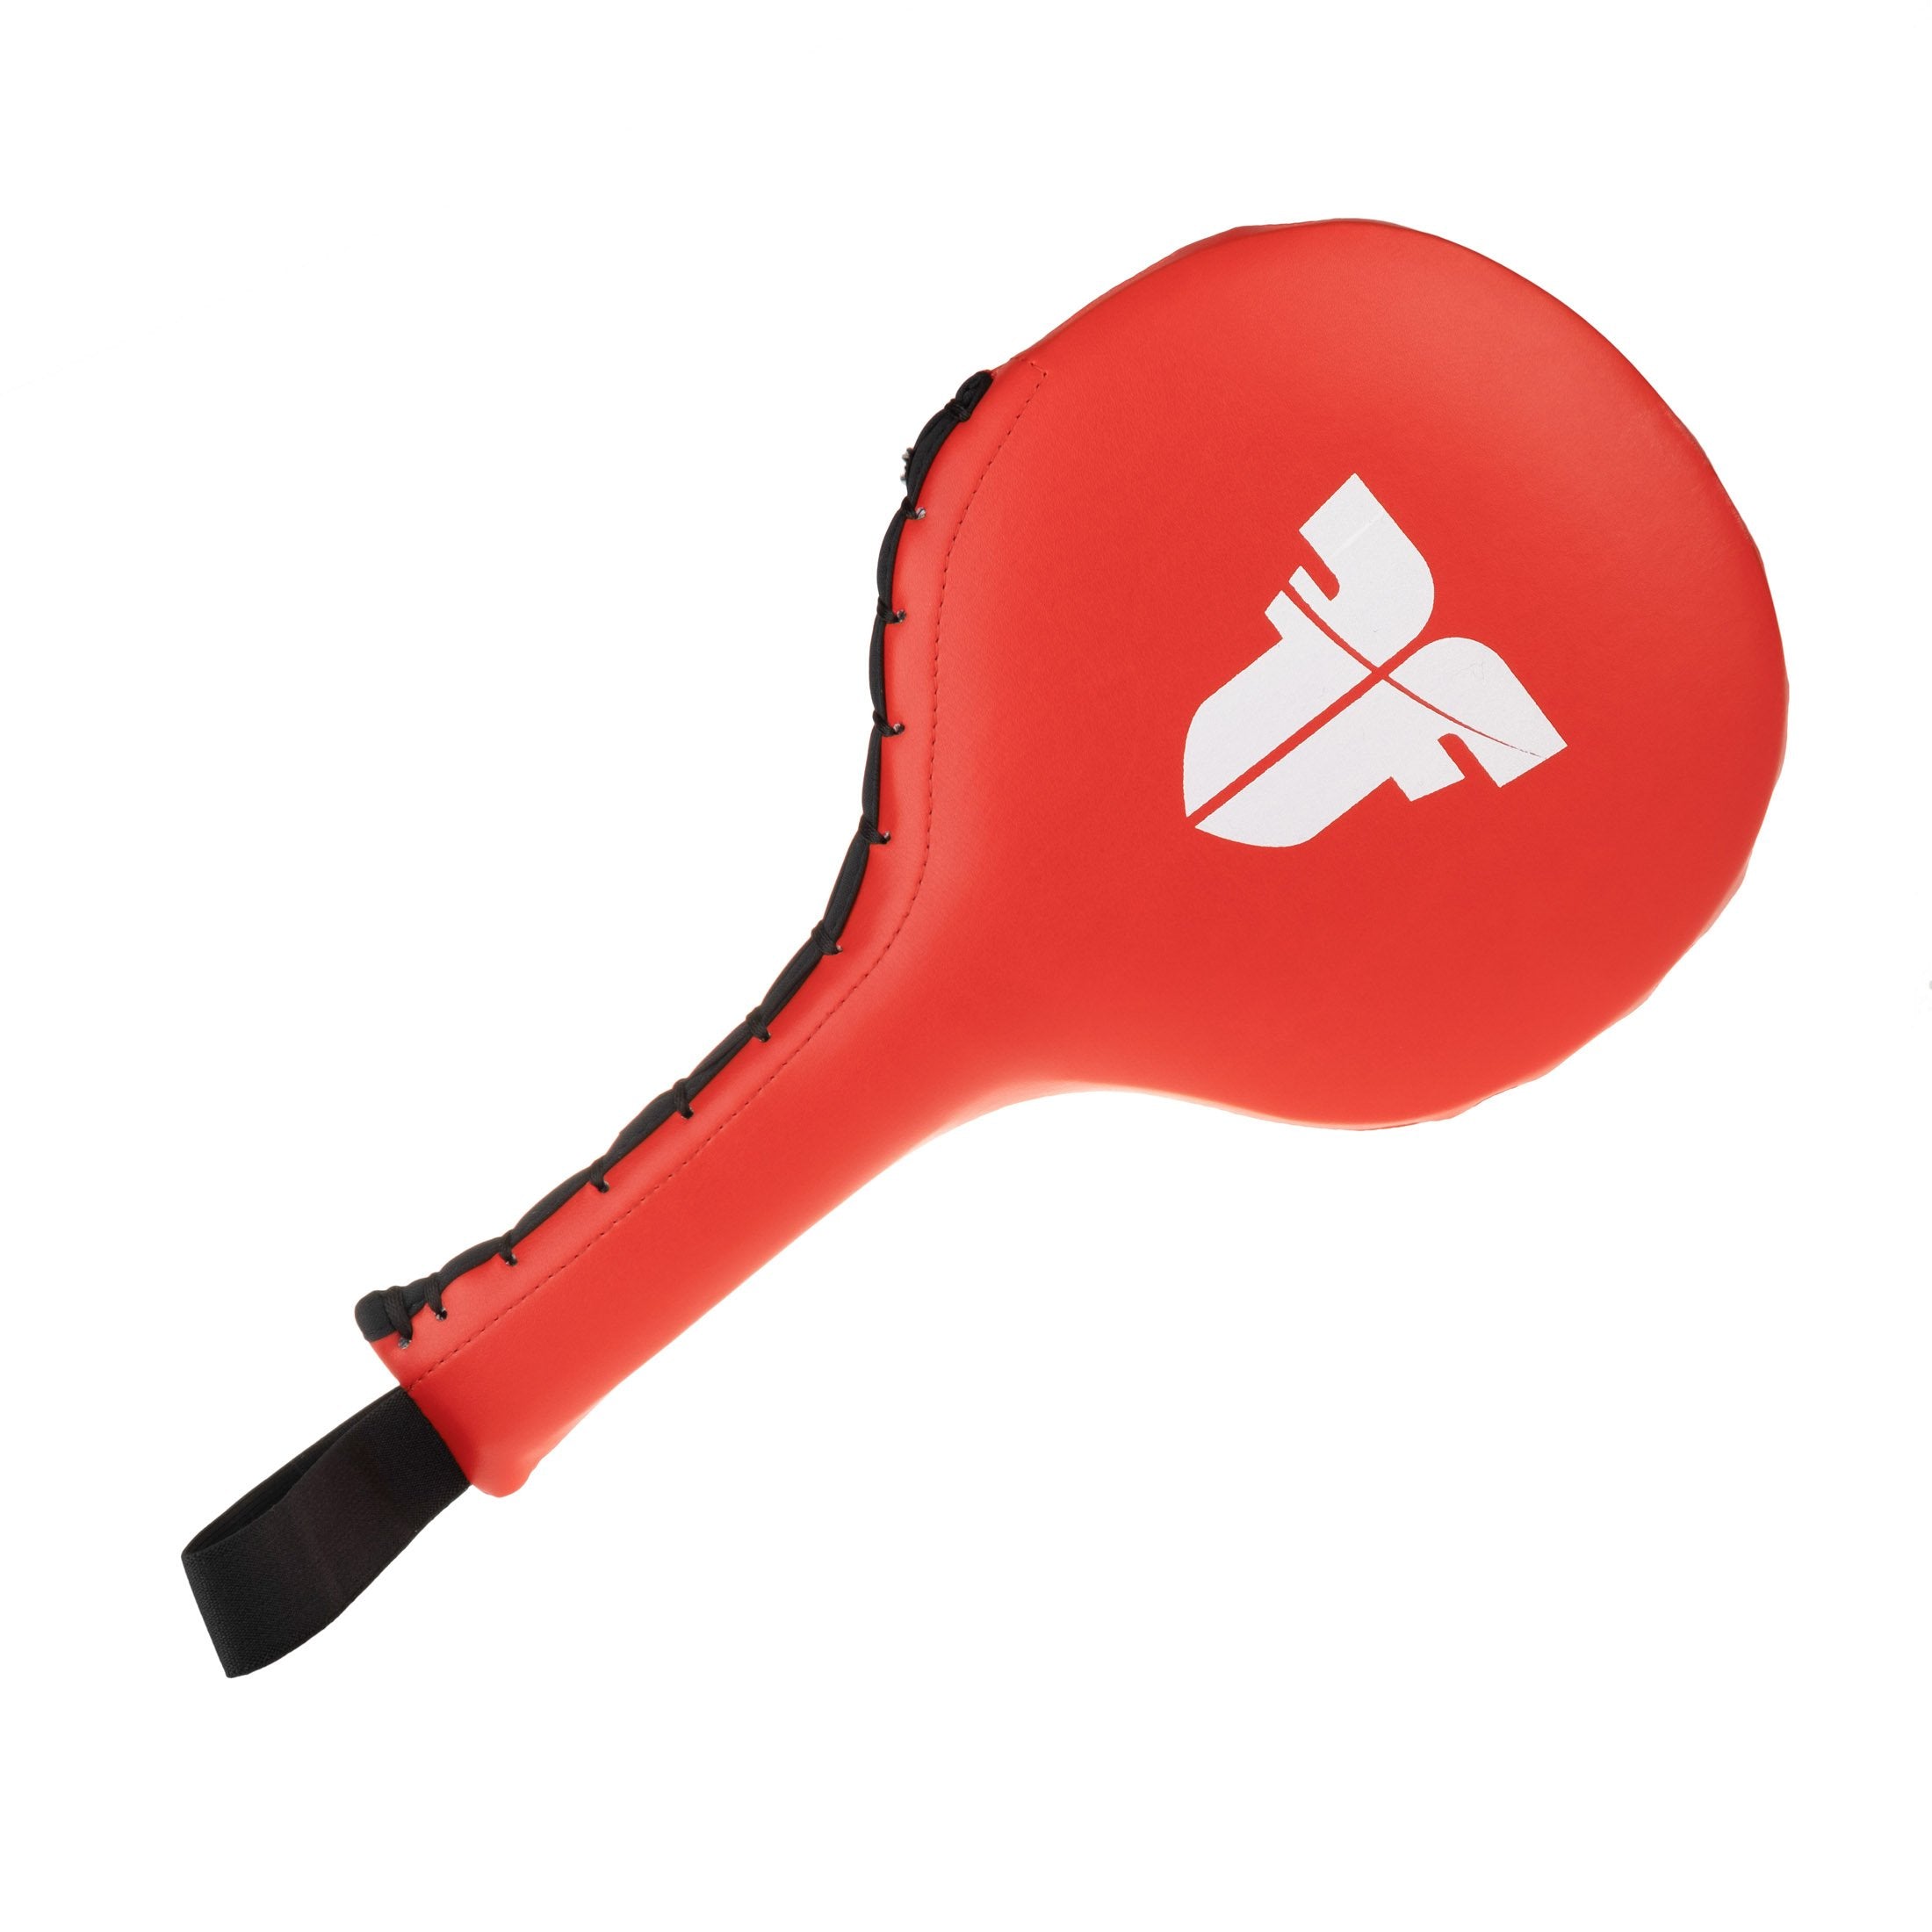 Fighter Target Mitts - black/red